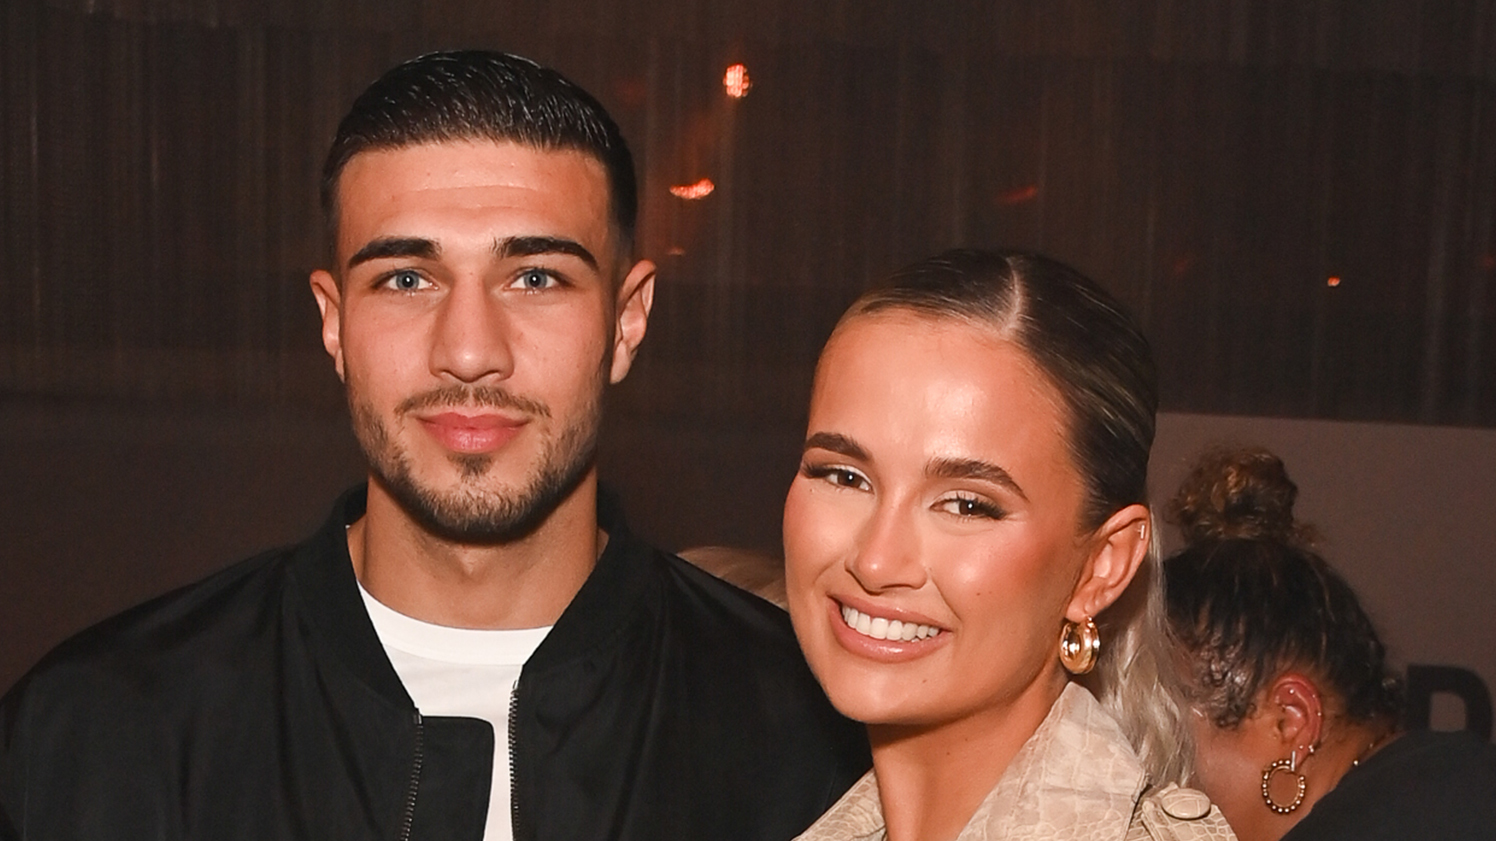 This is why fans think Molly-Mae and Tommy Fury are getting engaged